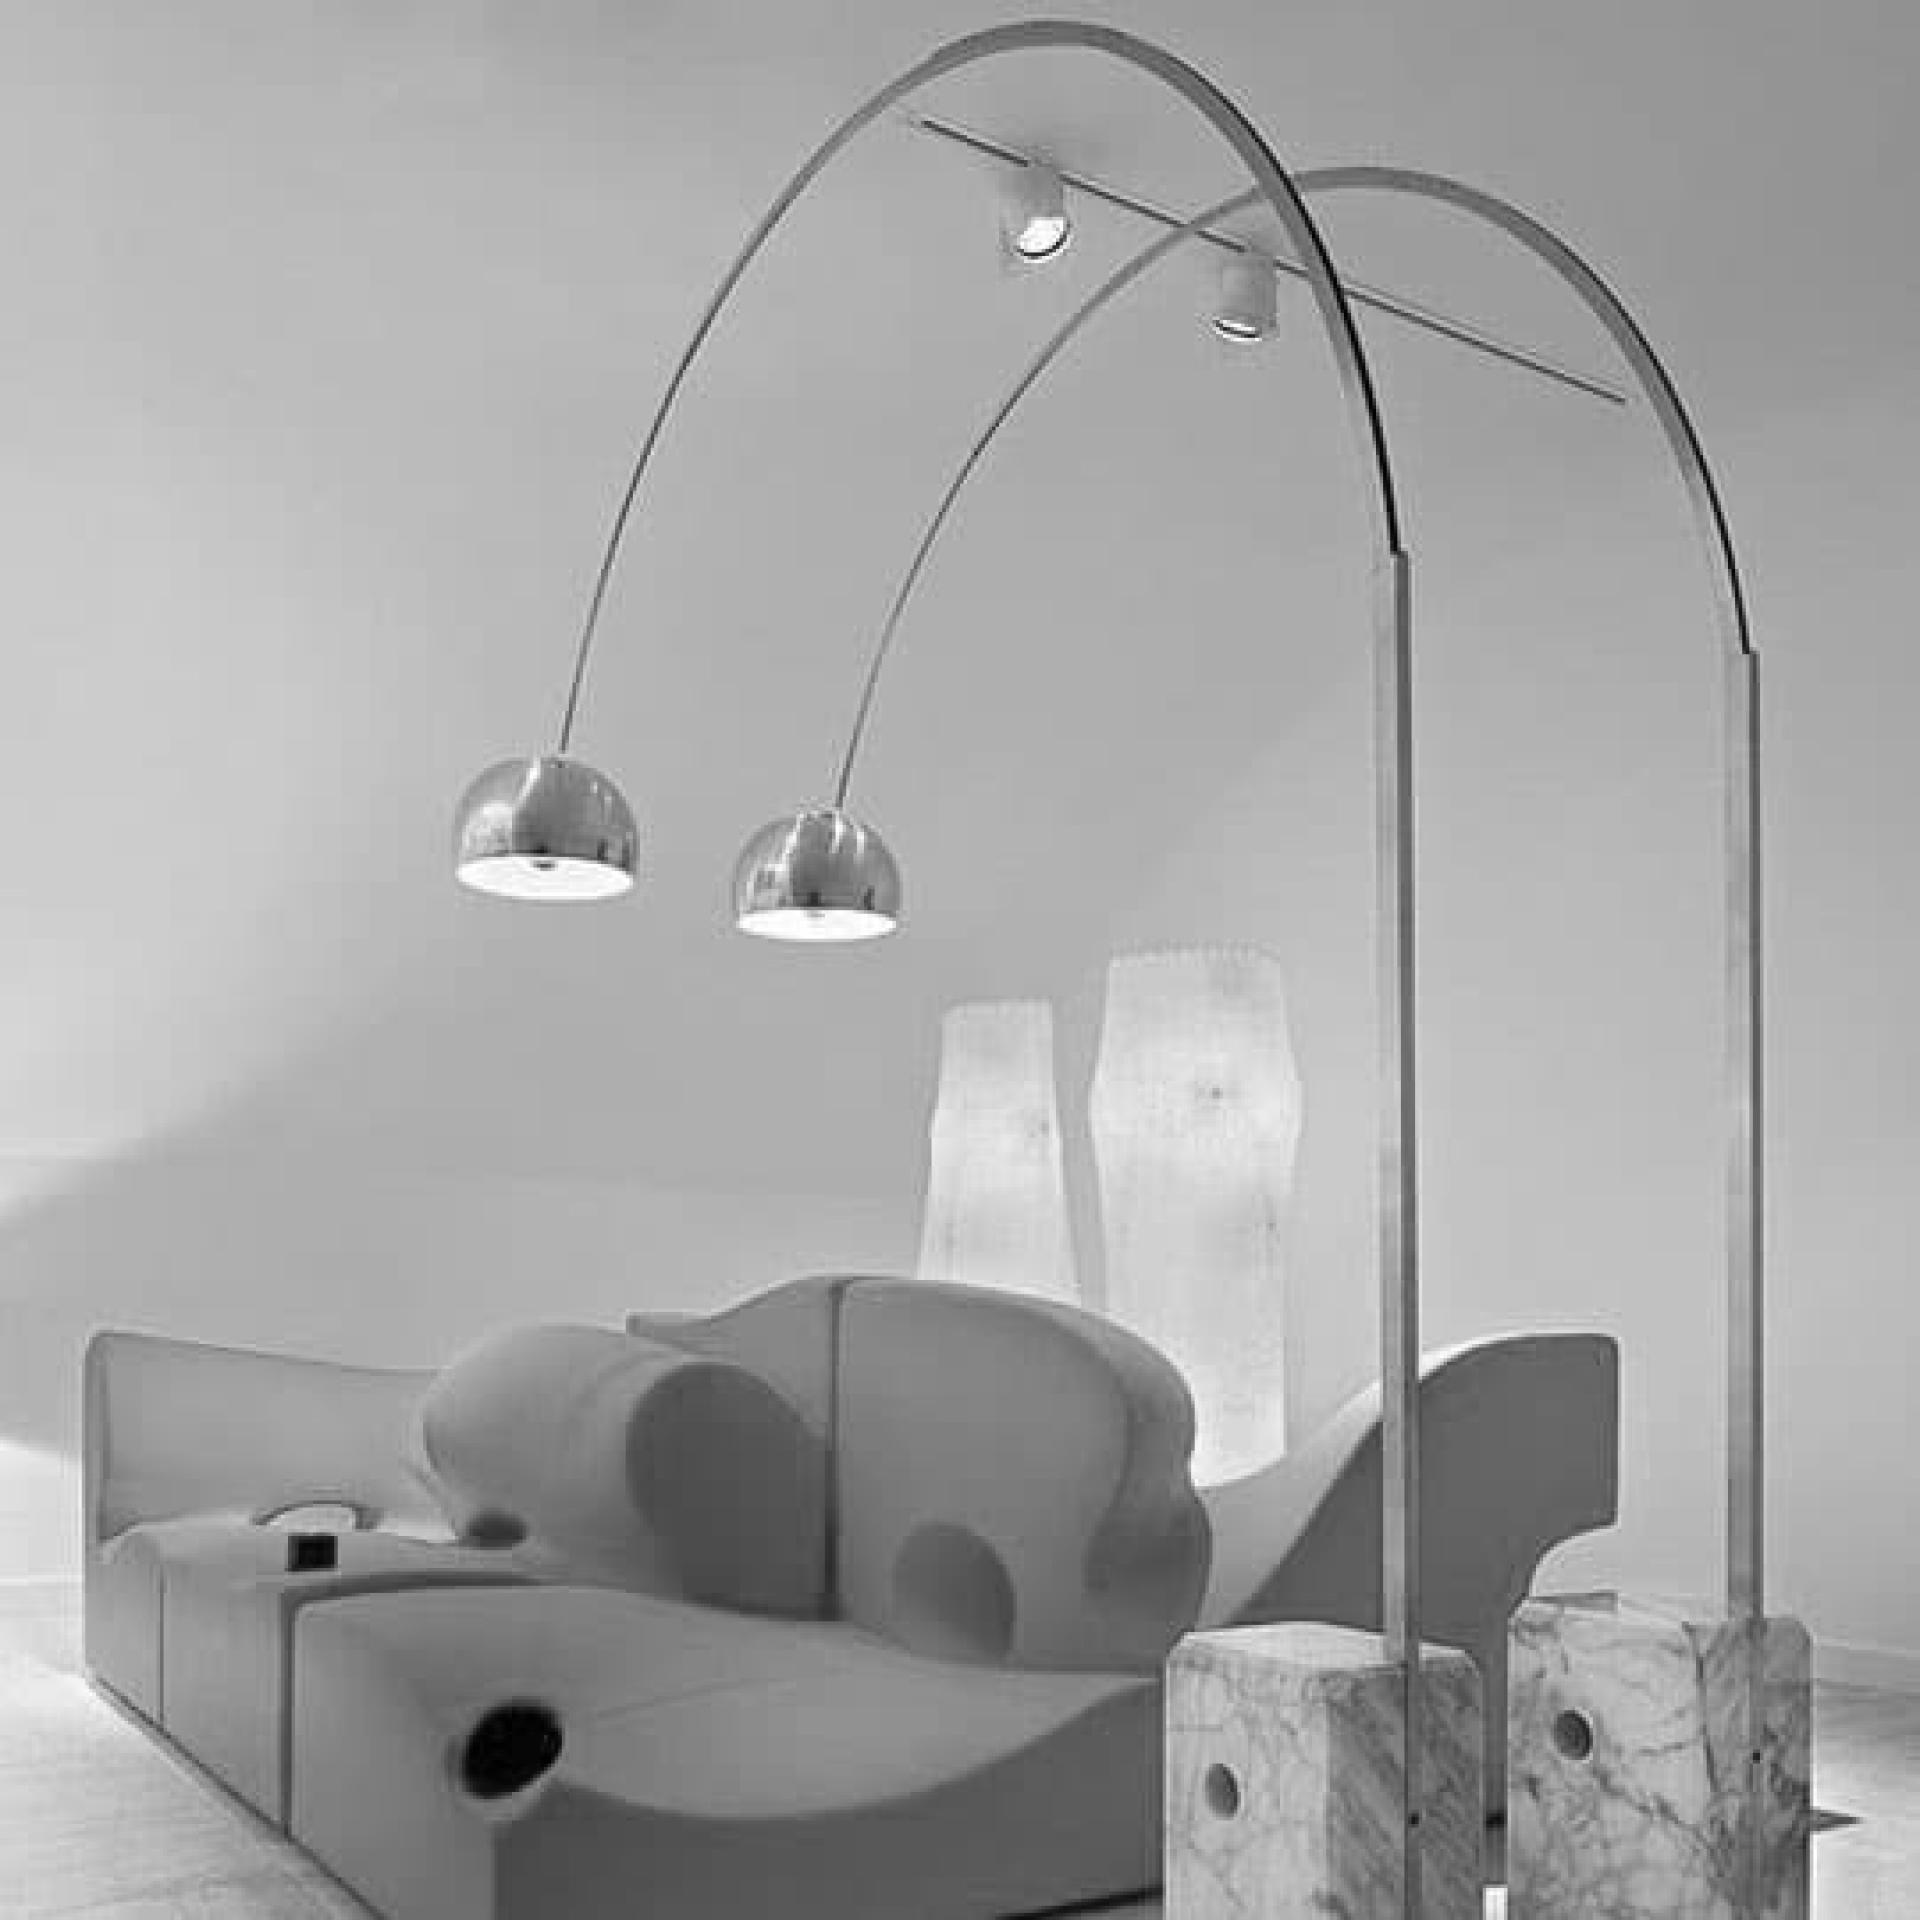 In 1962 the Arco floor lamp with a marble base designed by ”Achille & Pier Giacomo Castiglioni” was produced by the company Flos.